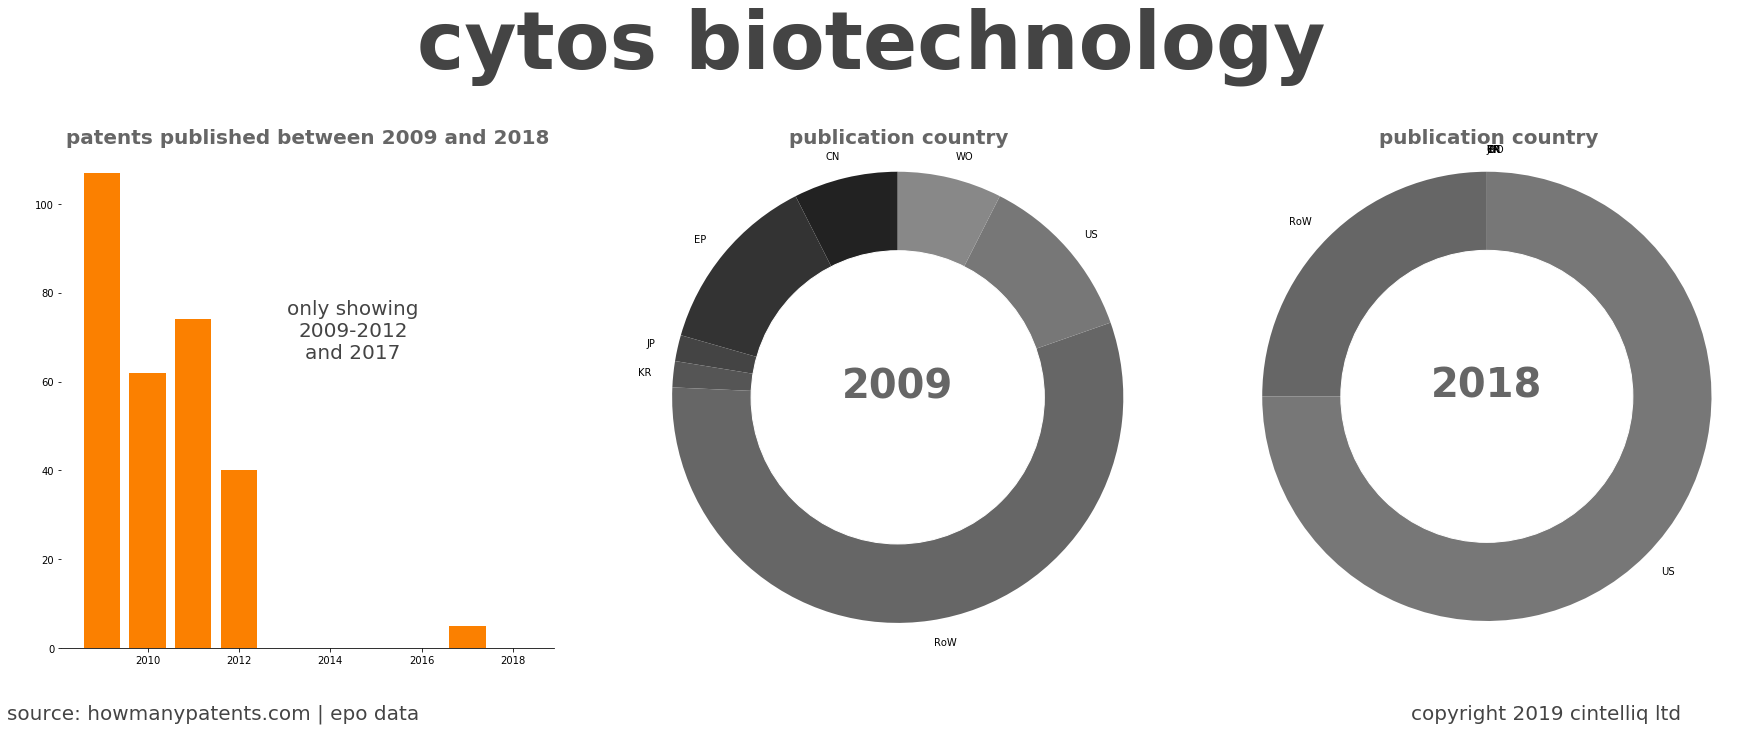 summary of patents for Cytos Biotechnology